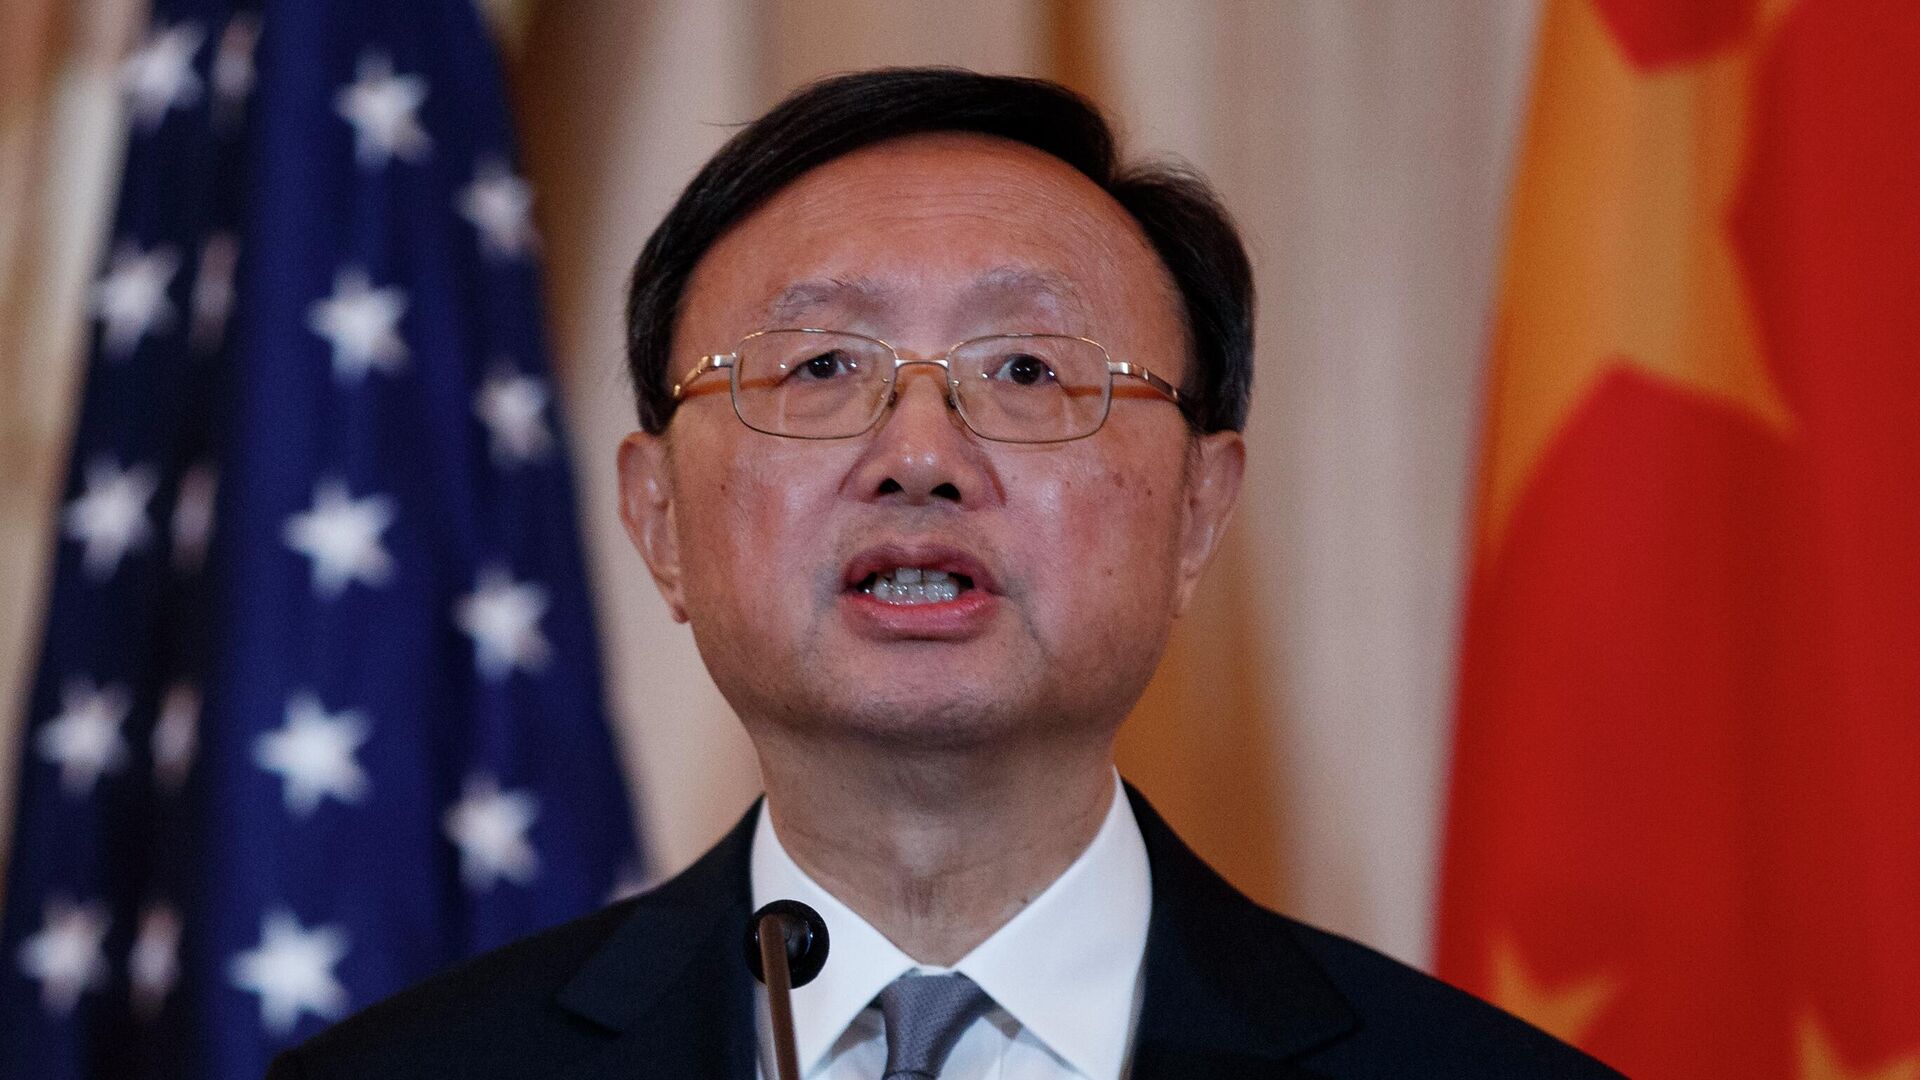 FILE -  In this Nov. 9, 2018, file photo, Chinese Politburo Member Yang Jiechi speaks during a news conference at the State Department in Washington - Sputnik International, 1920, 06.08.2022